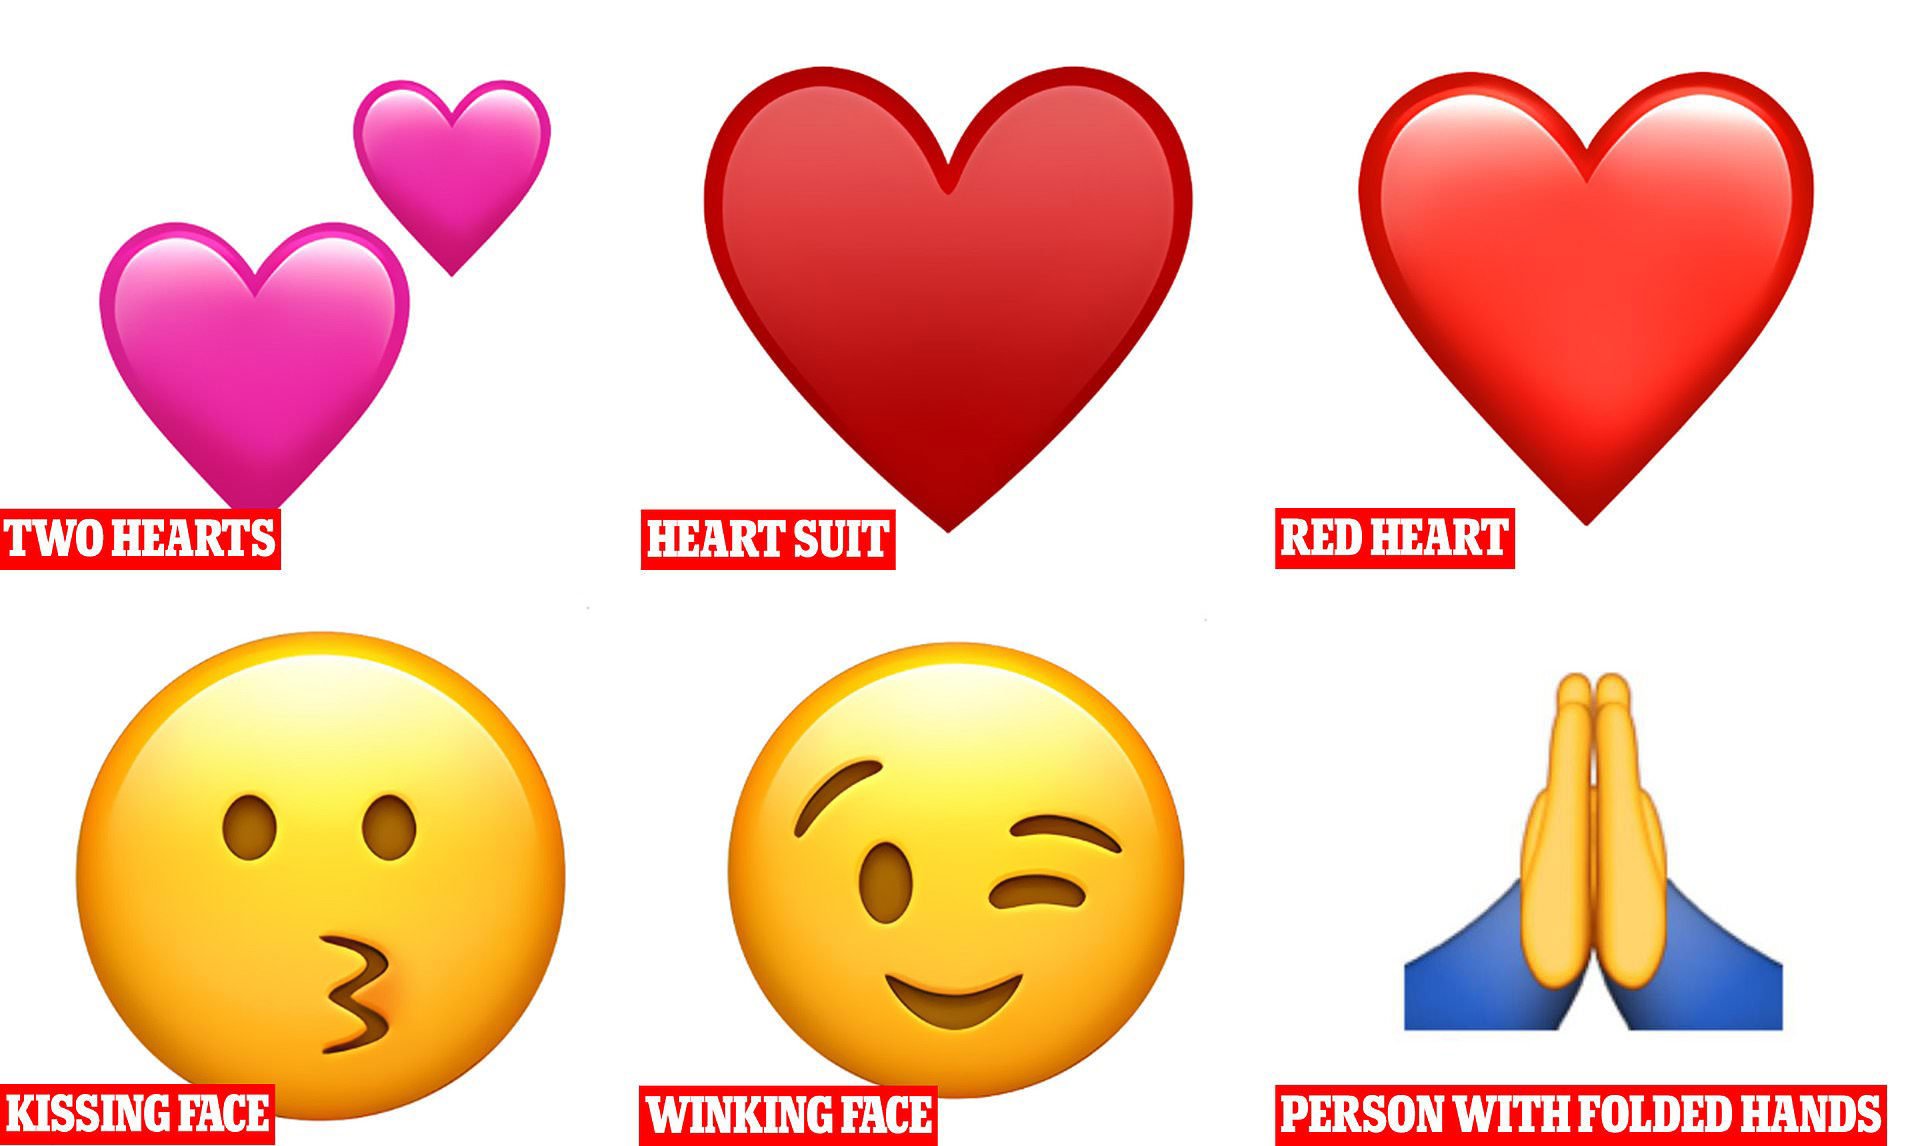 britain-s-top-10-emoji-icks-revealed-are-you-guilty-of-using-any